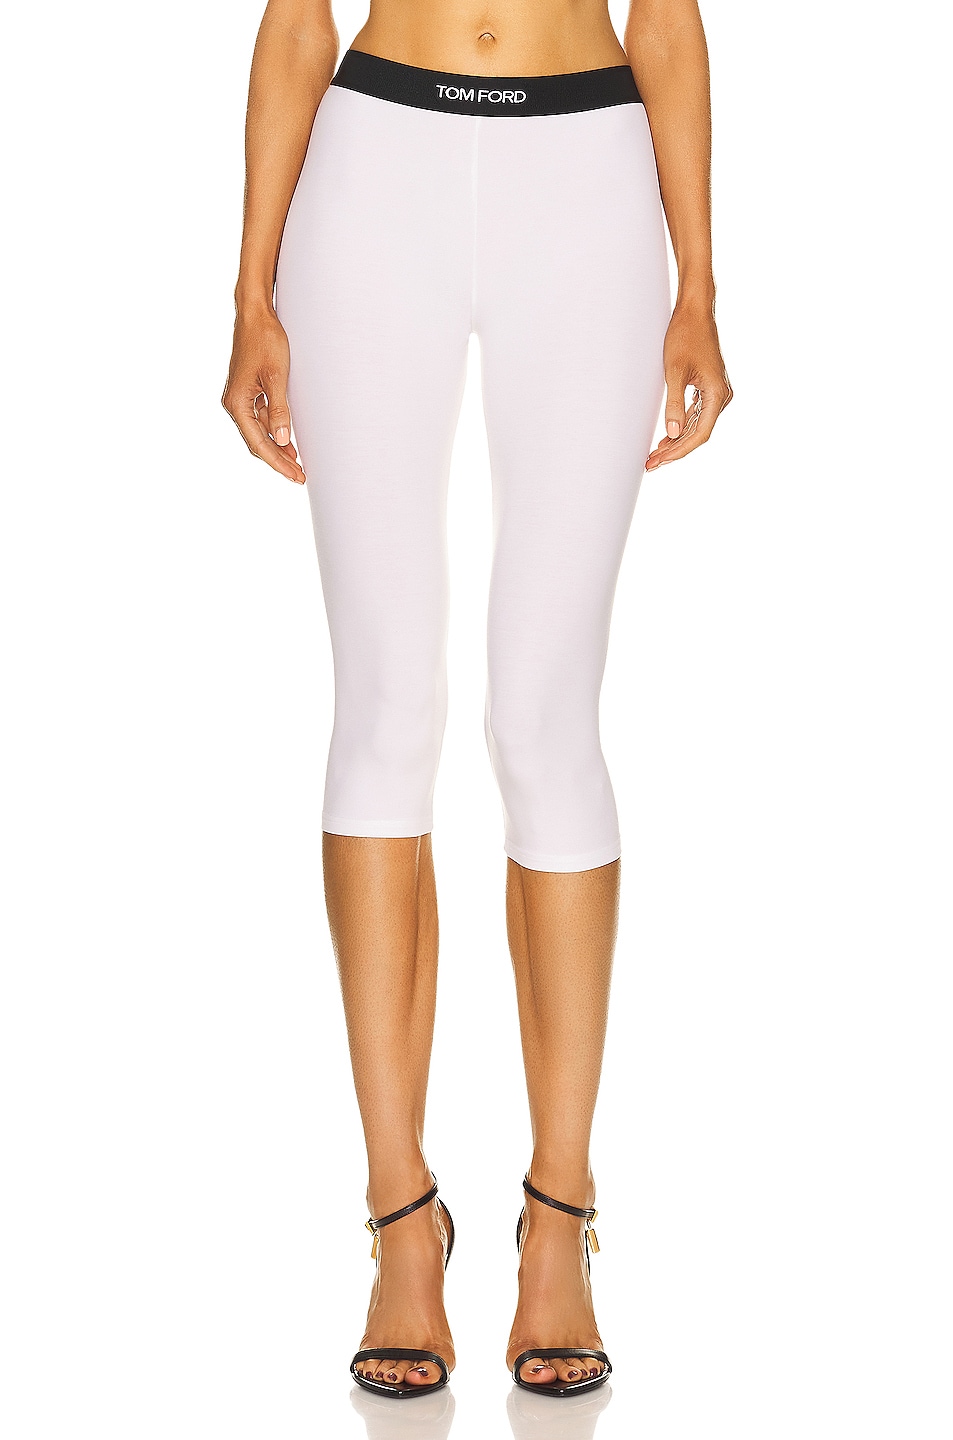 Image 1 of TOM FORD Signature Yoga Pant in White